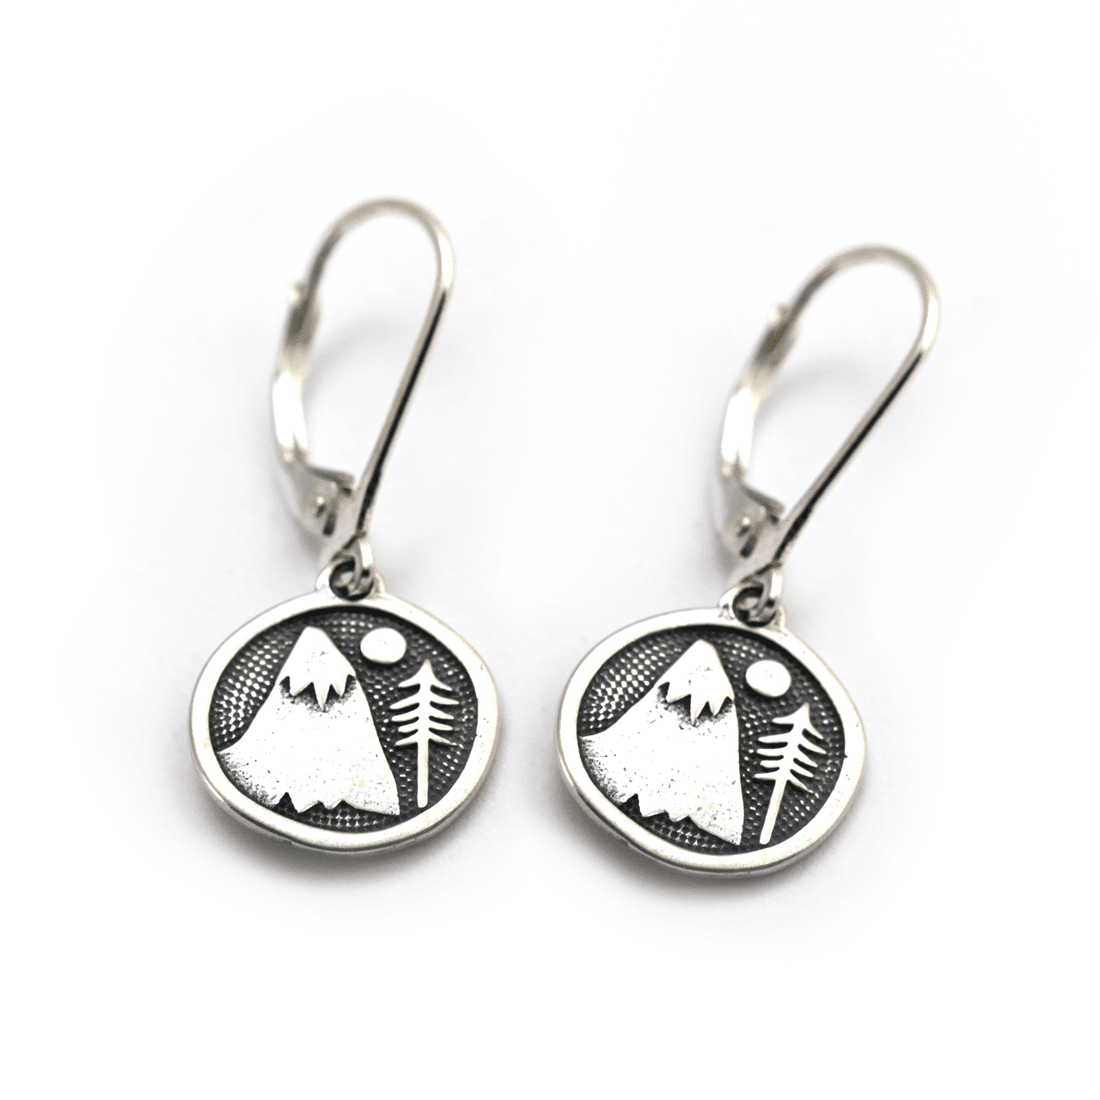 Mountain and tree earrings in sterling silver